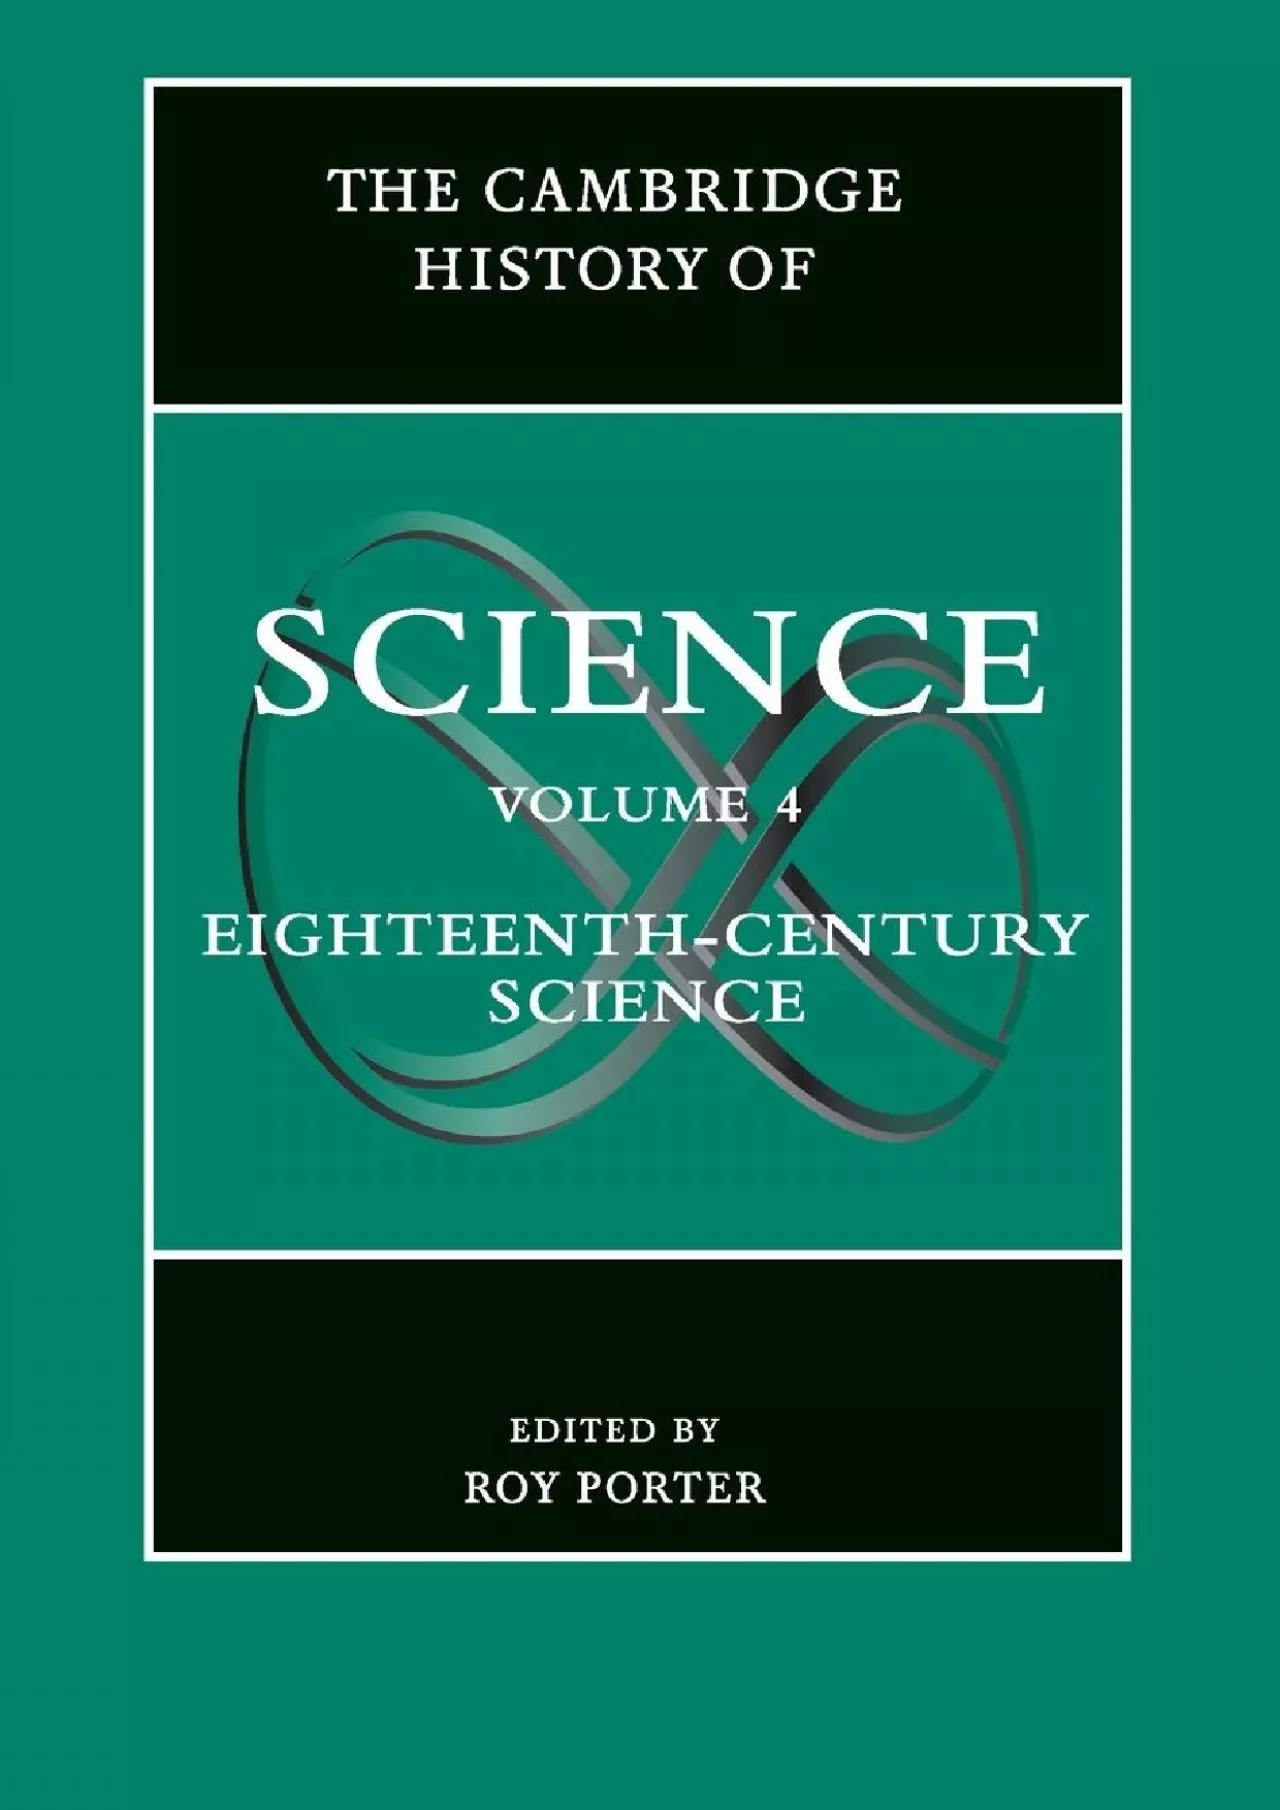 [DOWNLOAD]-The Cambridge History of Science: Volume 4, Eighteenth-Century Science